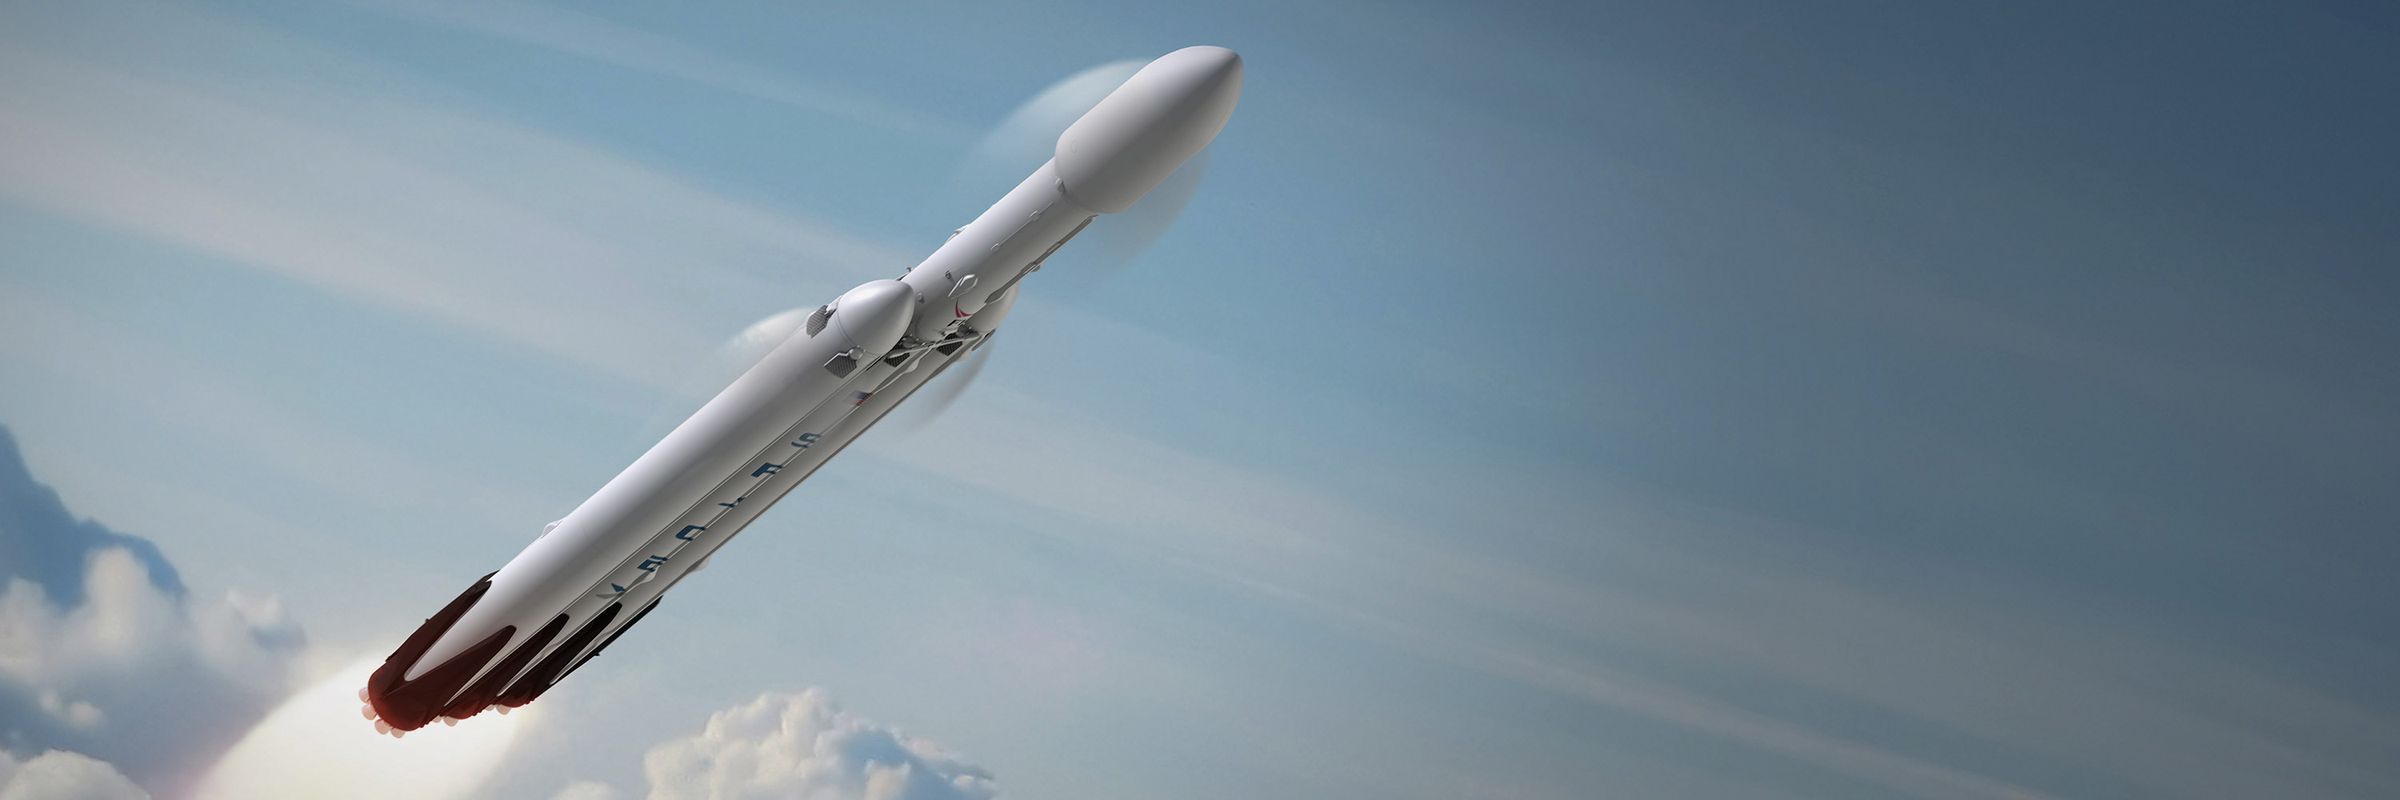 An artistic rendering of SpaceX’s Falcon Heavy rocket